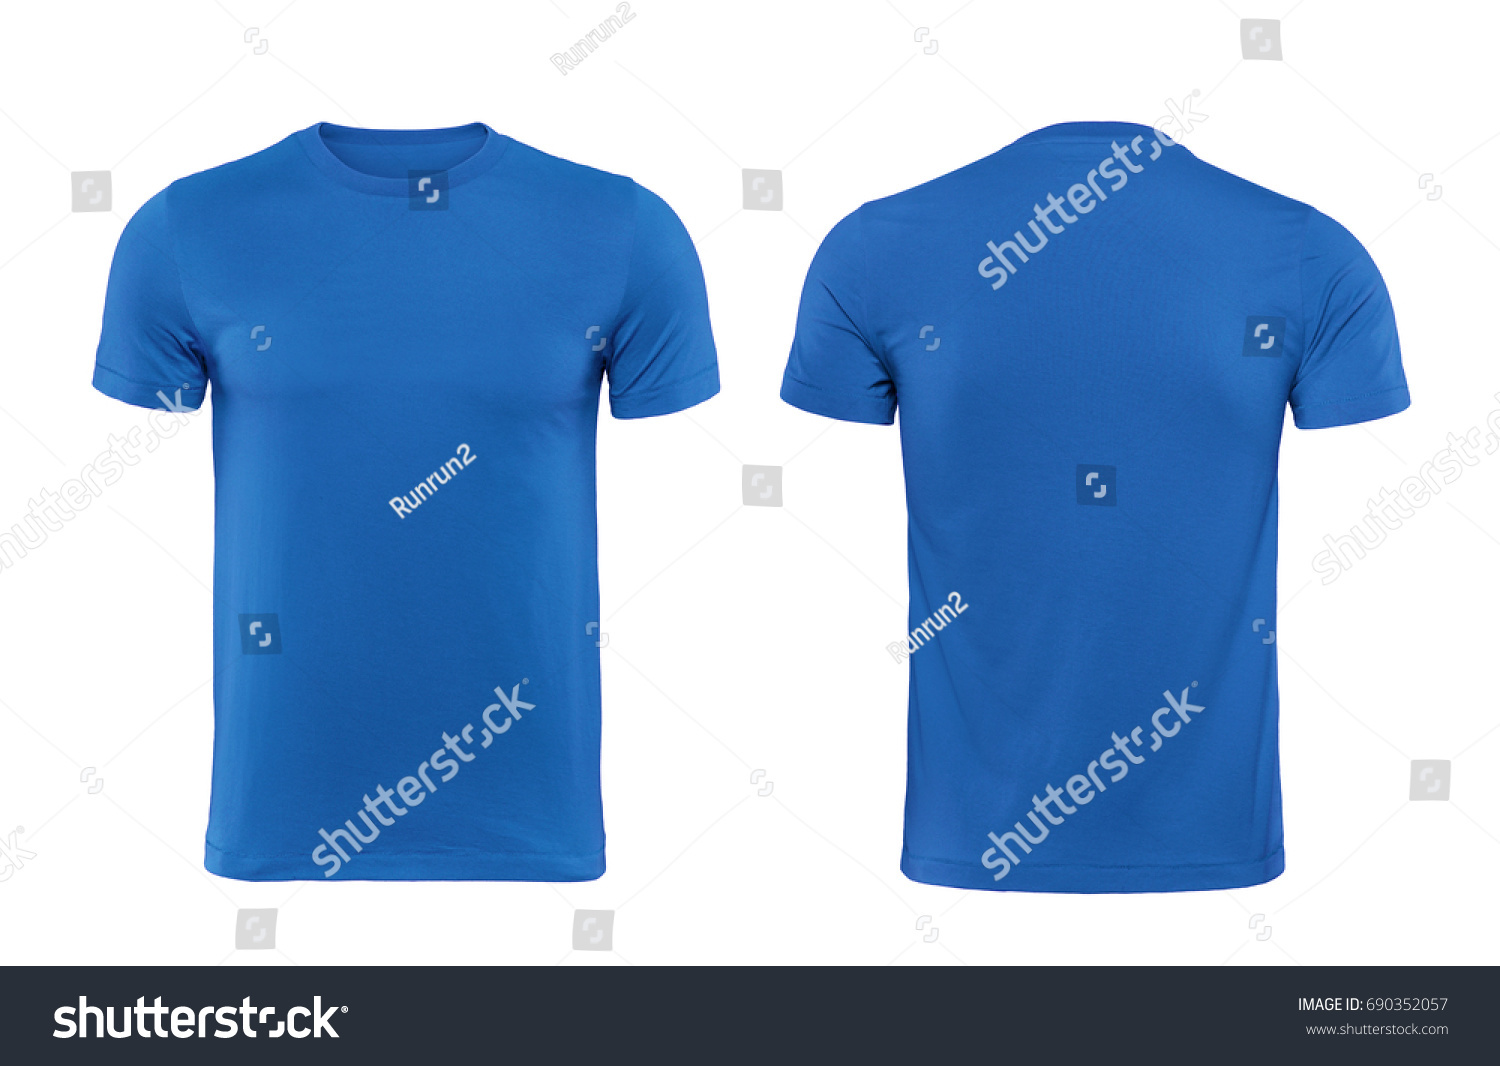 Blue blank t shirt template isolated on white with clipping path. #690352057